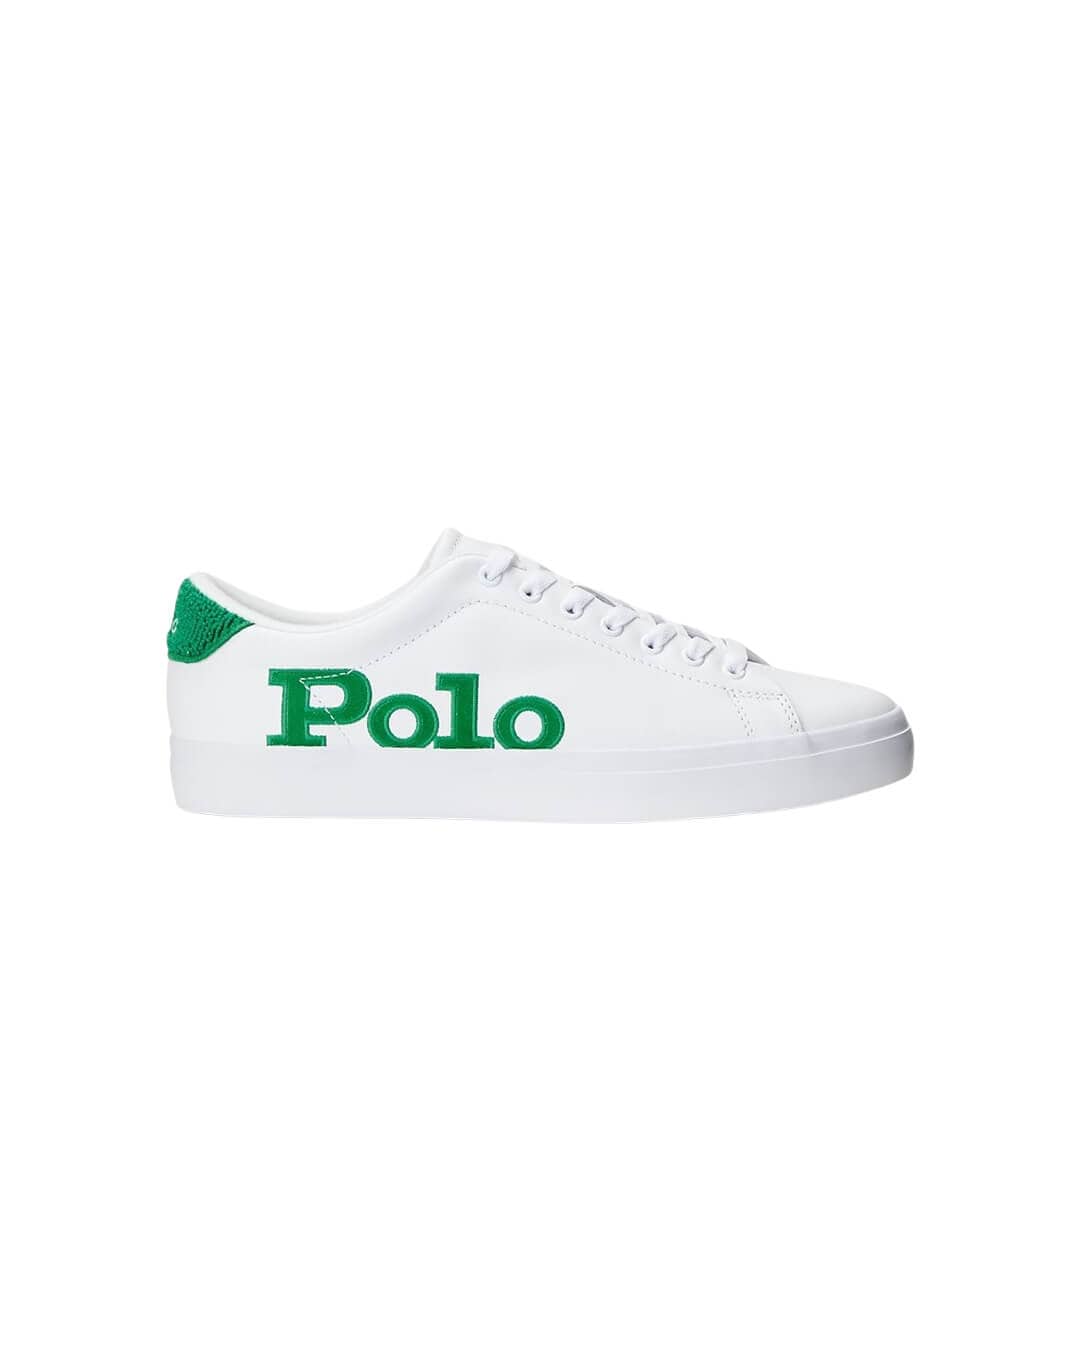 Polo Ralph Lauren Shoes LONGWOOD-SNEAKERS-LOW TOP LACE WHITE/ENGL GRNAW23